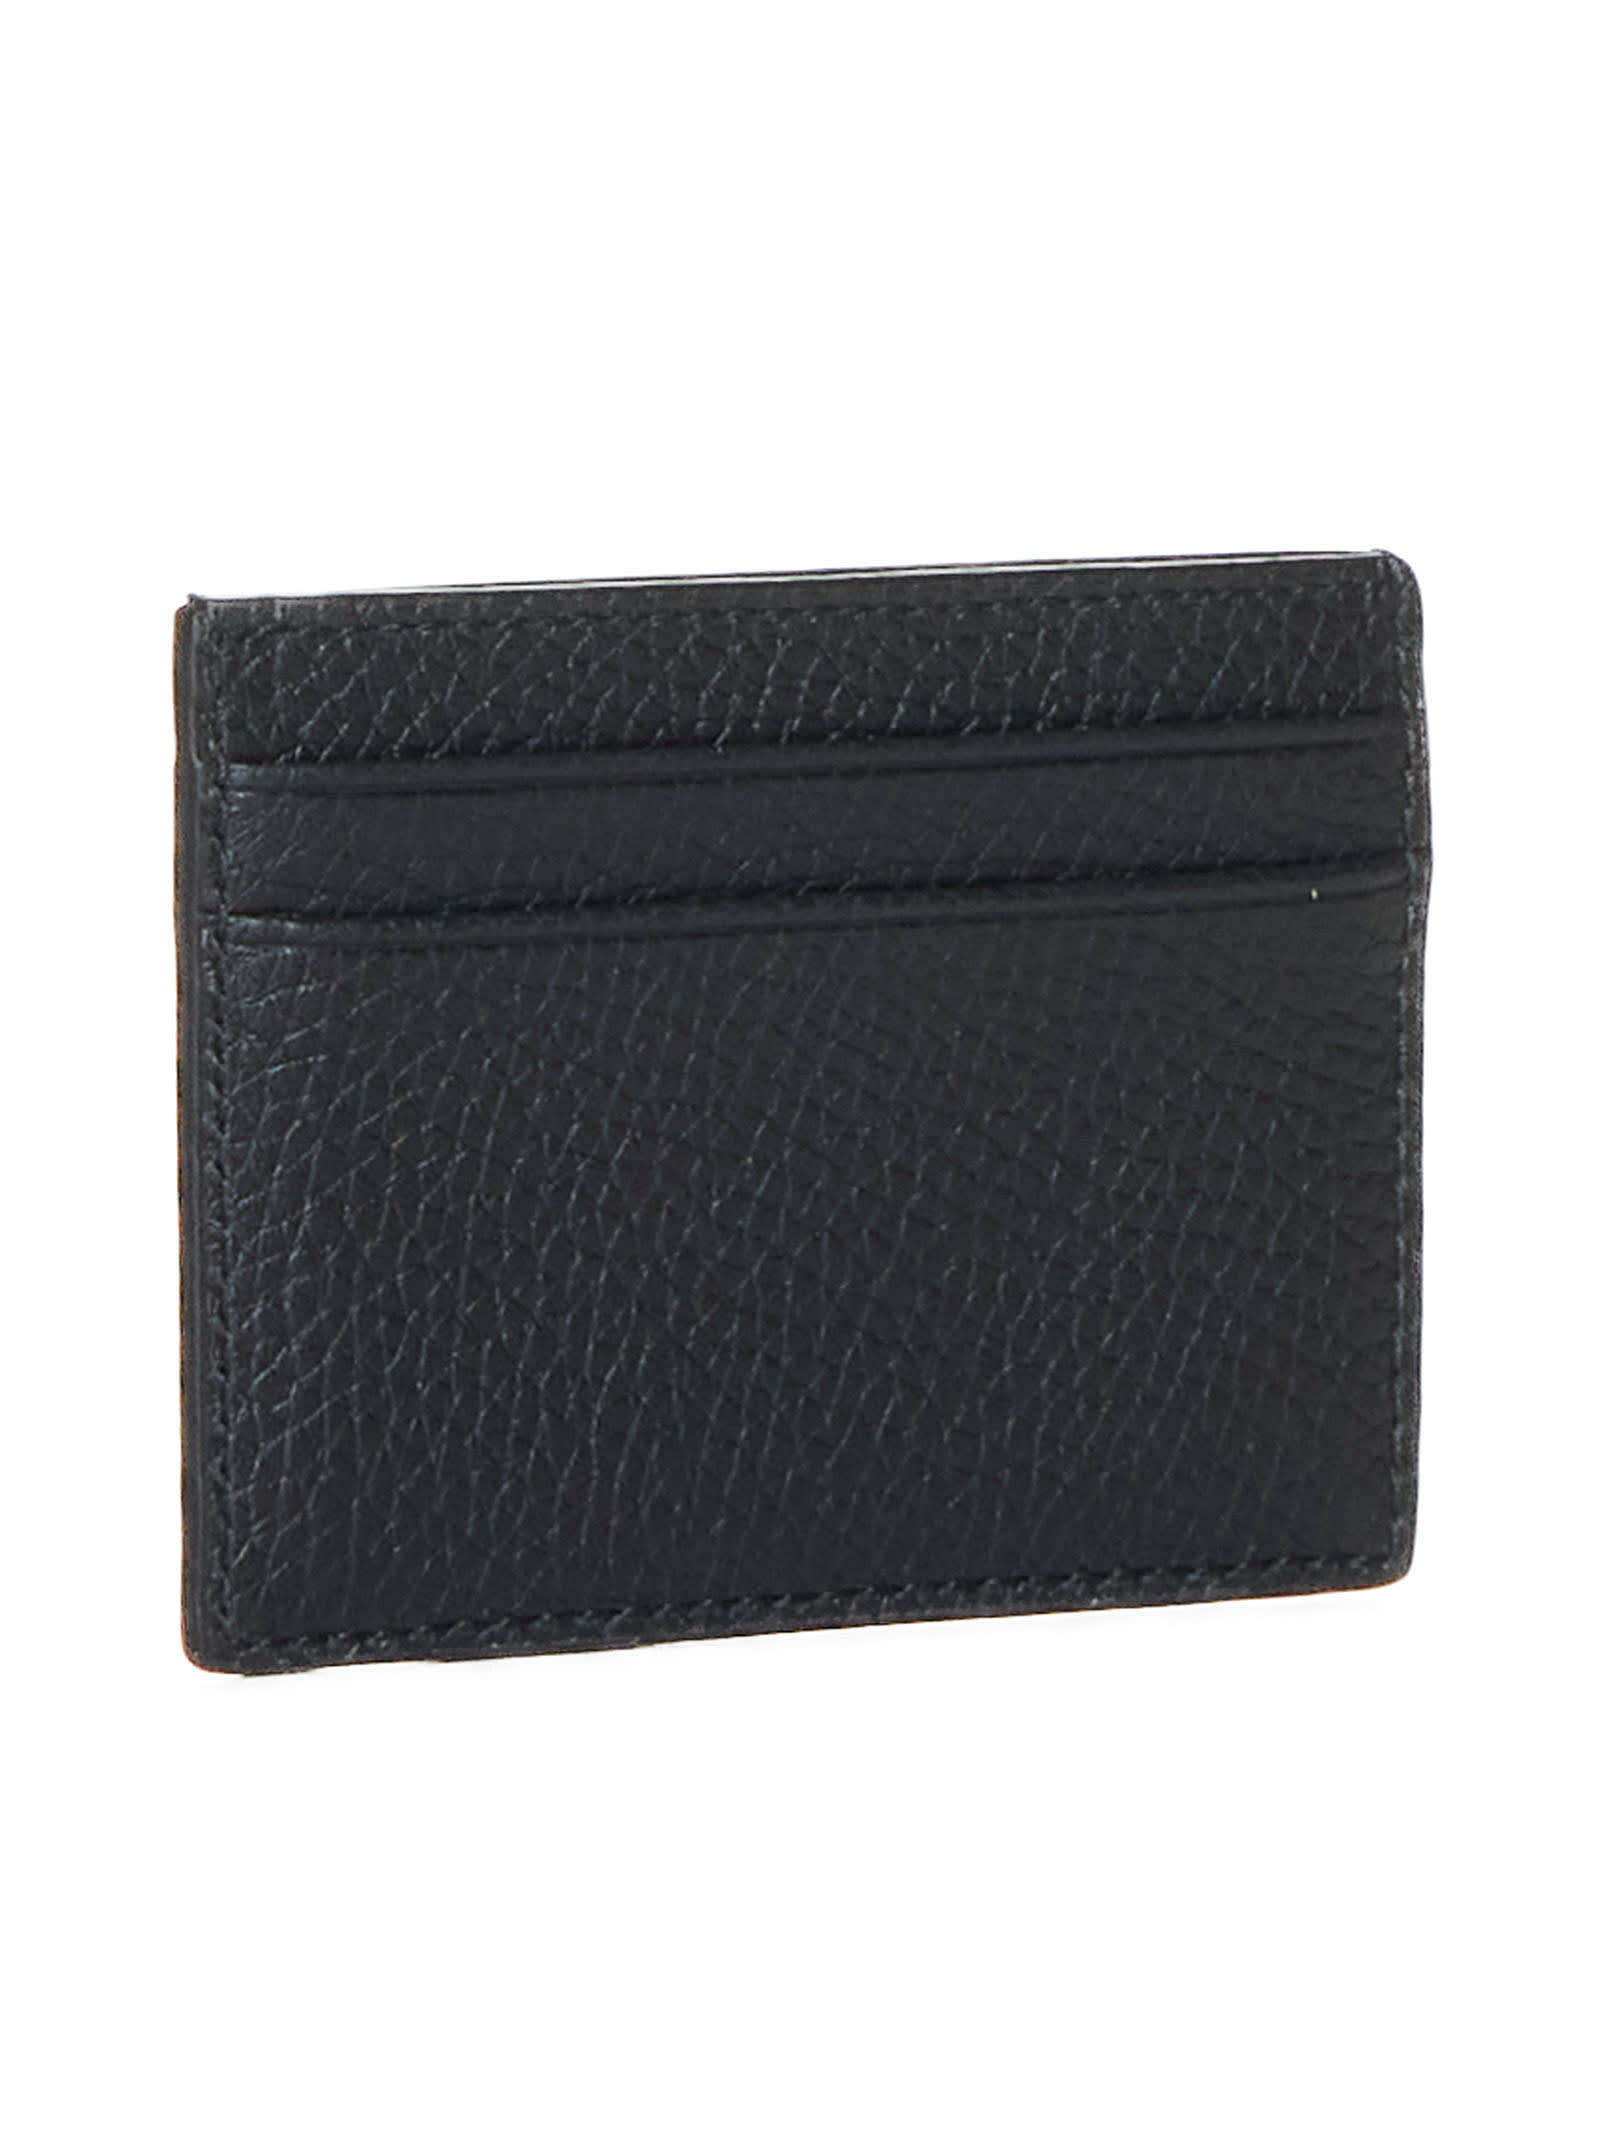 Shop Bally Wallet In Whiteblack/red+pall